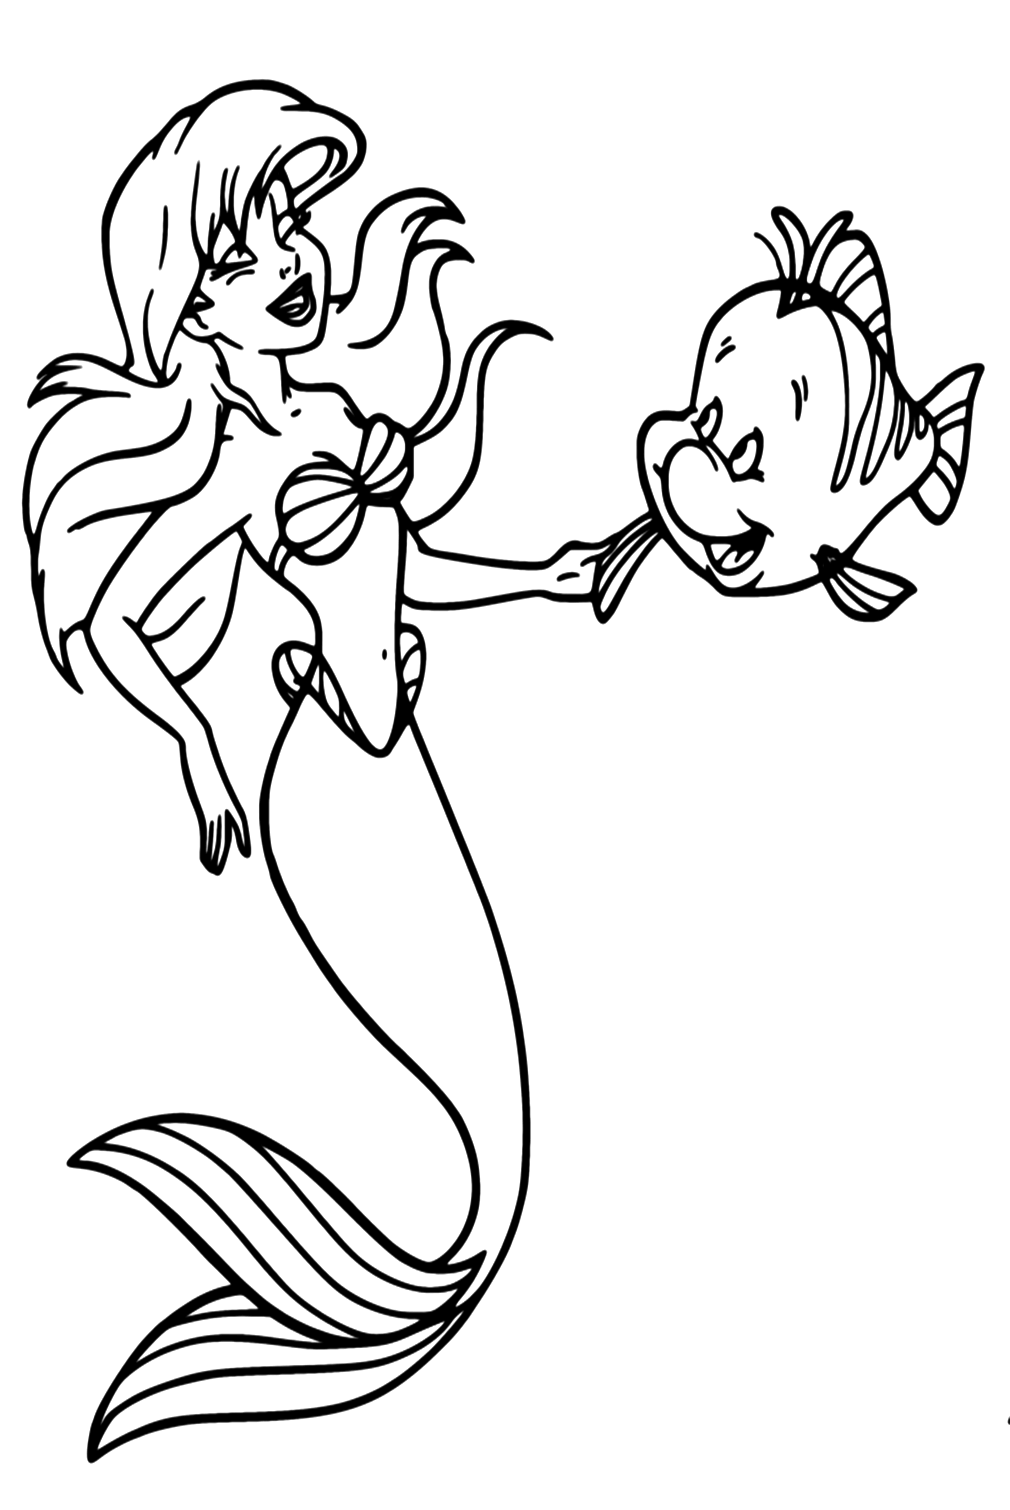 coloring pages of ariel and flounder